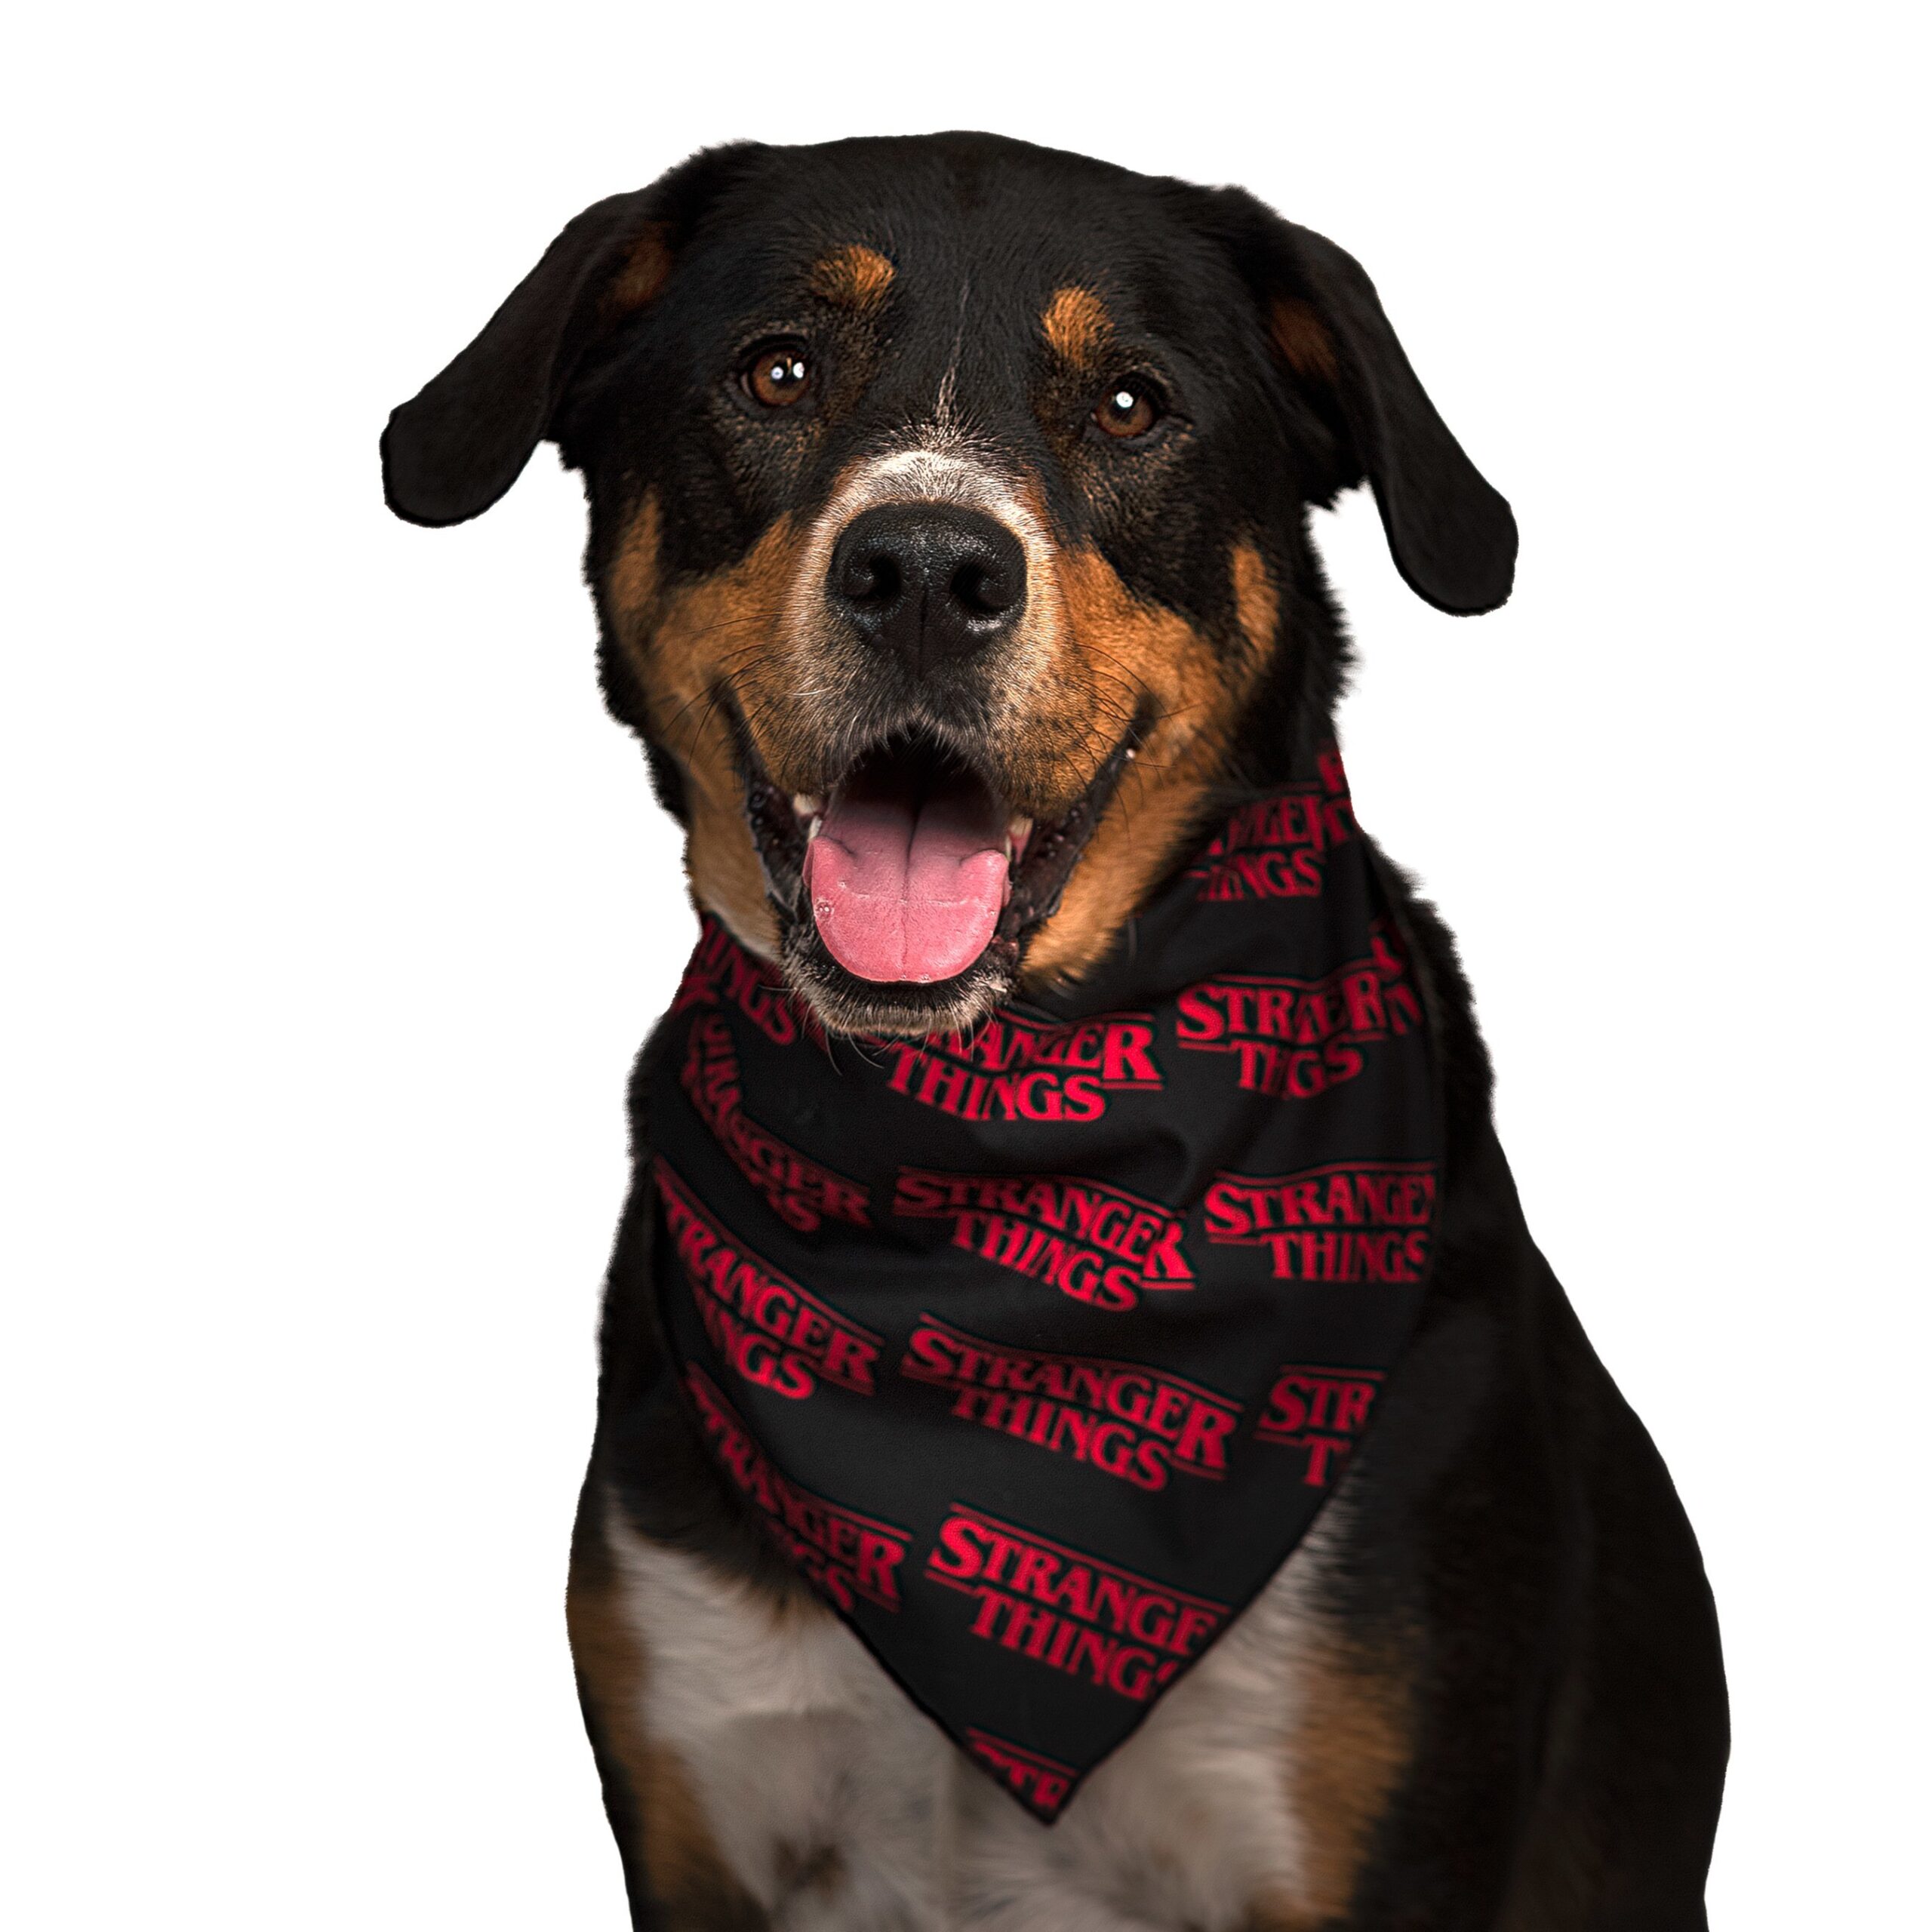 PetSmart and Netflix Bring the Upside Down to Four-legged Friends with Exclusive New Stranger Things Collection